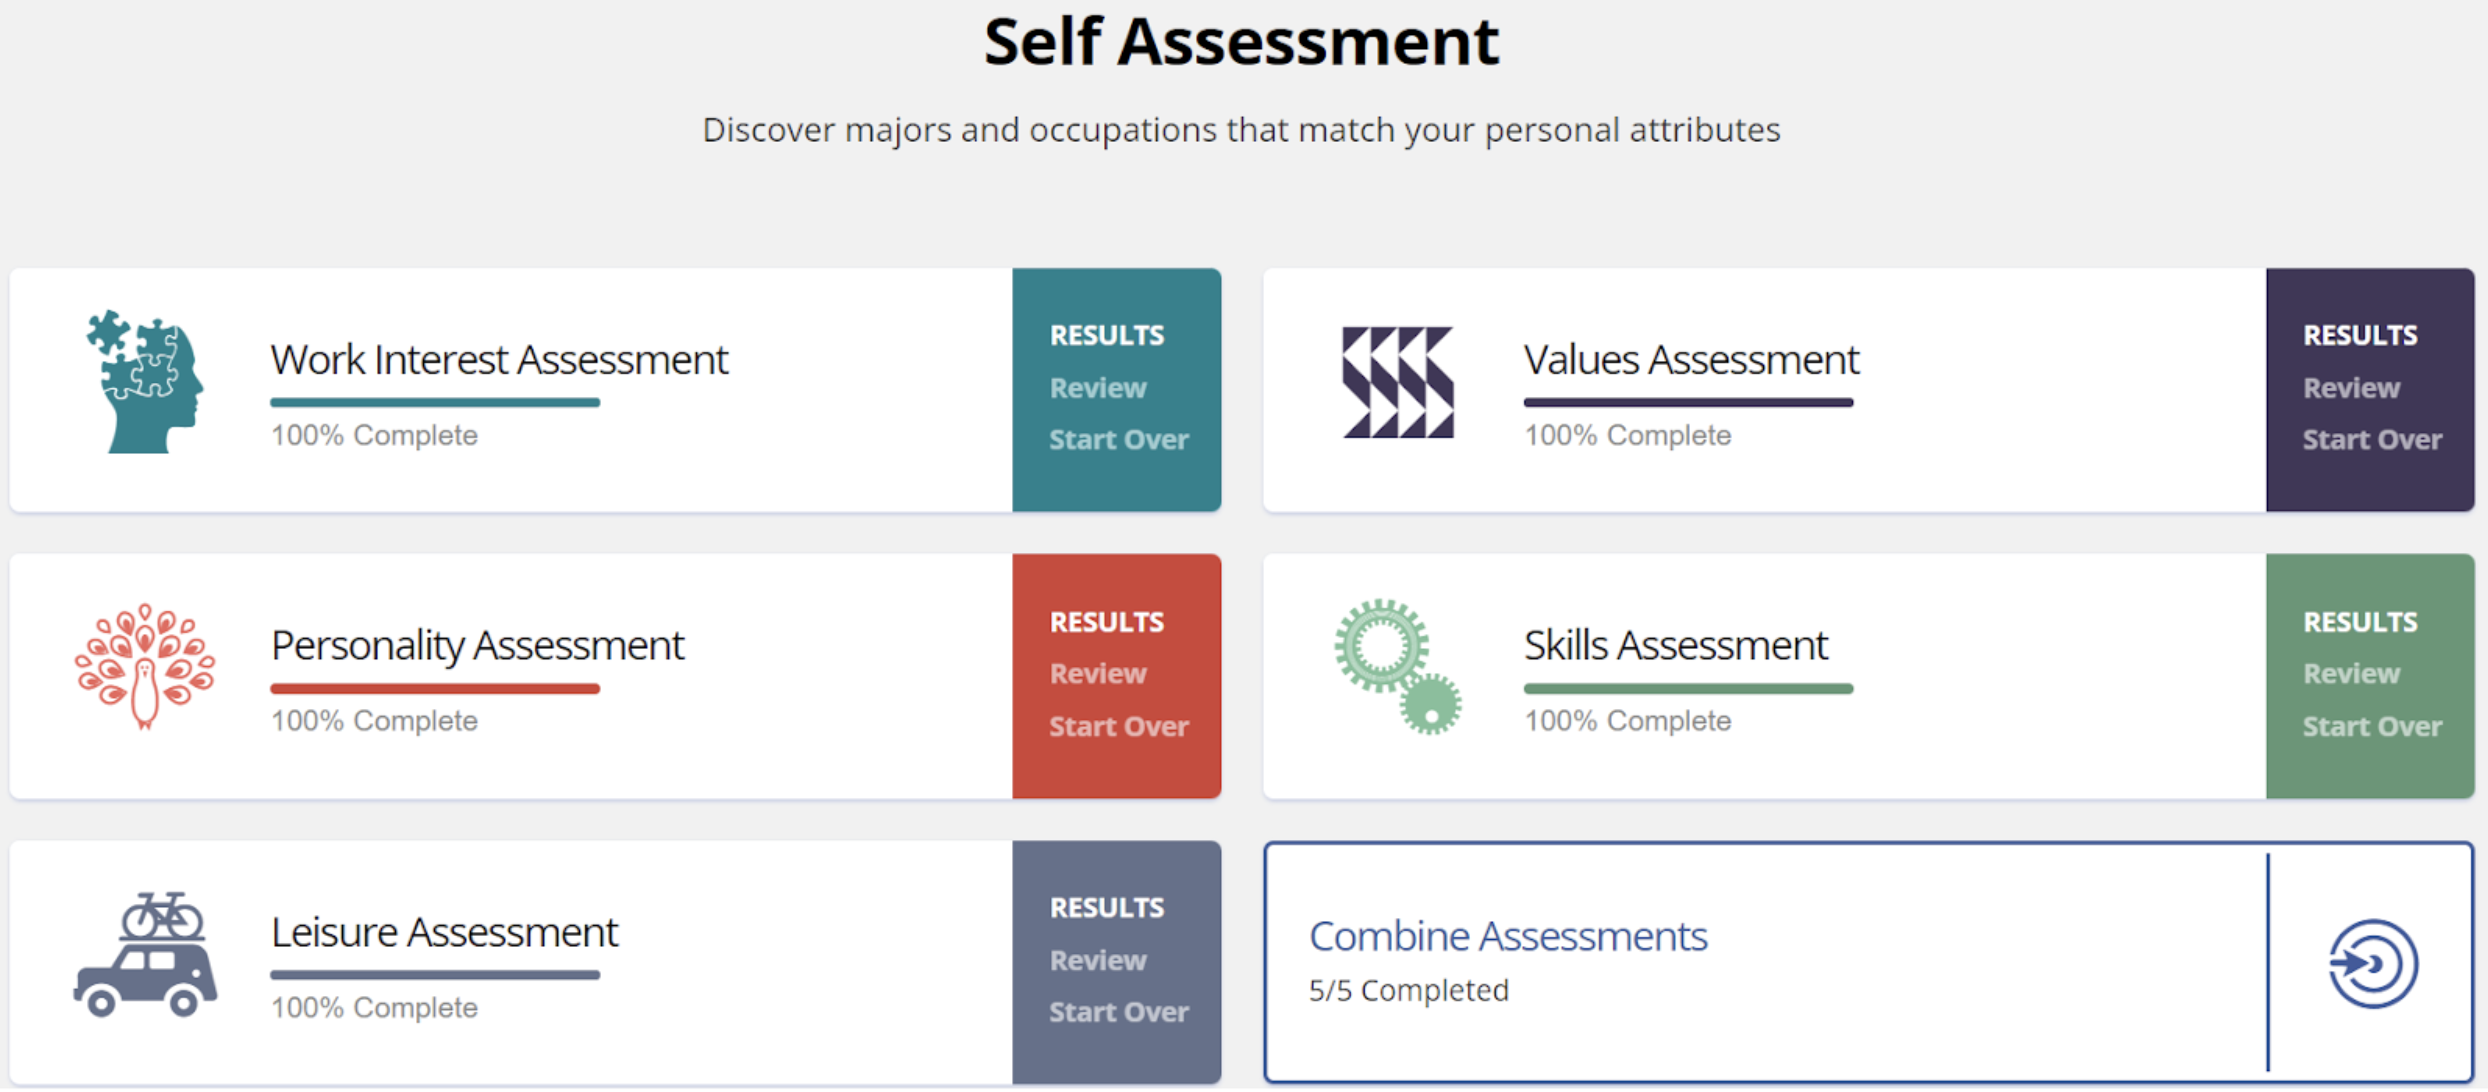 Self Assessment - Discover majors and occupations that match your personal attributes